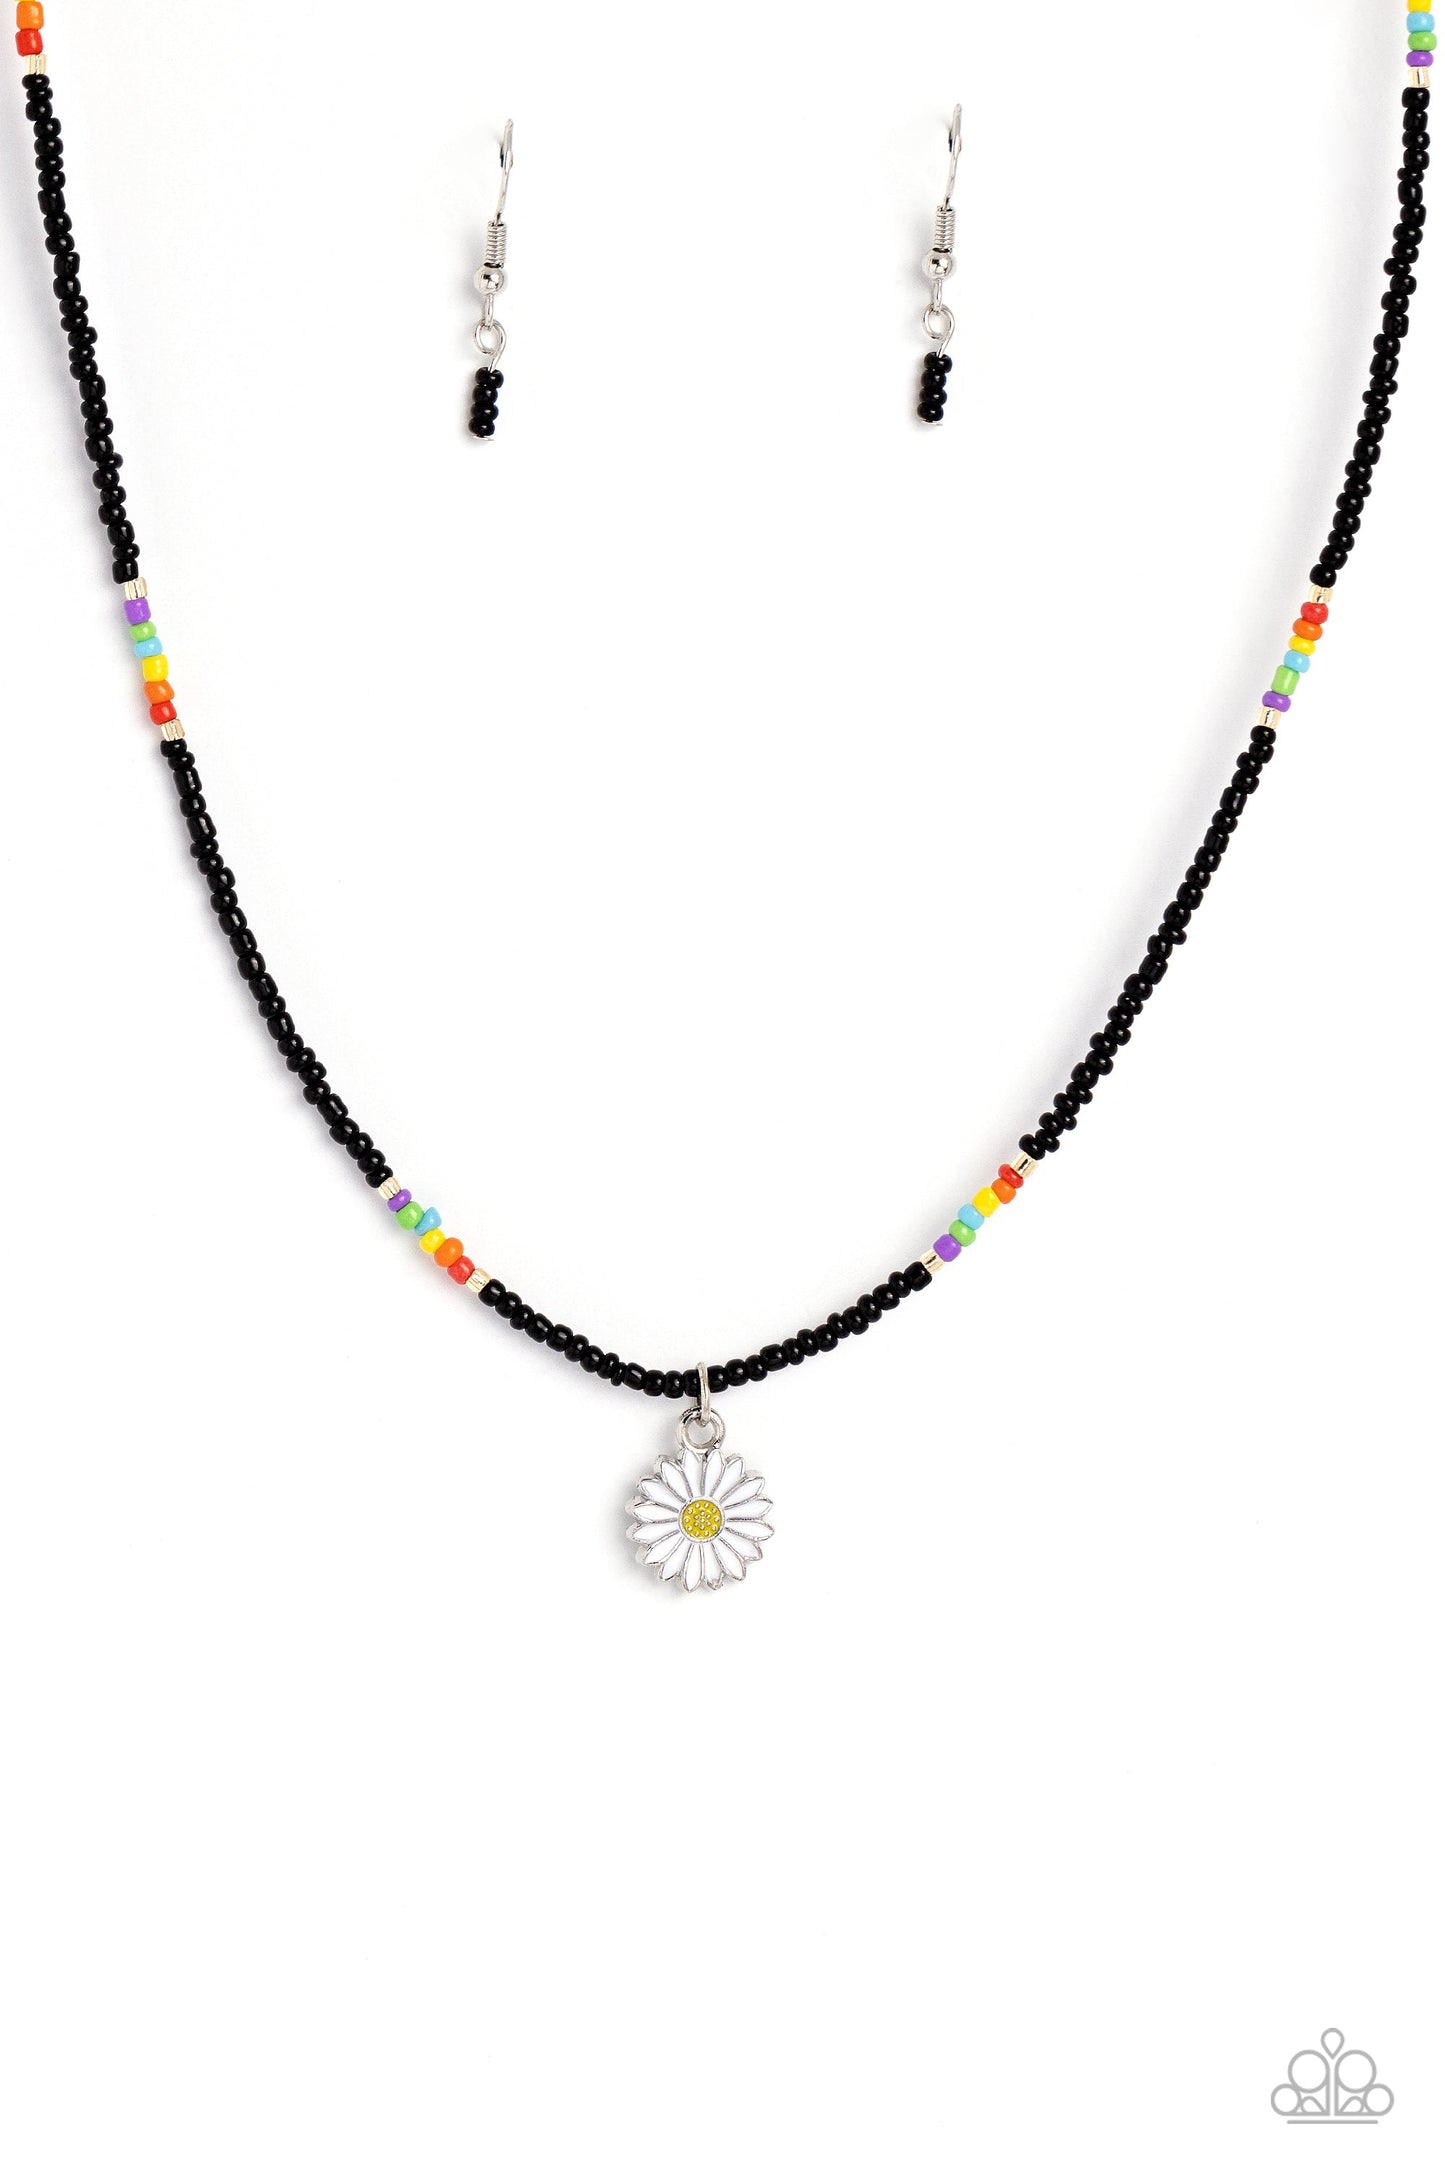 Charming Chance - Black/Multicolored Seed Beads/White Daisy Charm Necklace & matching earrings